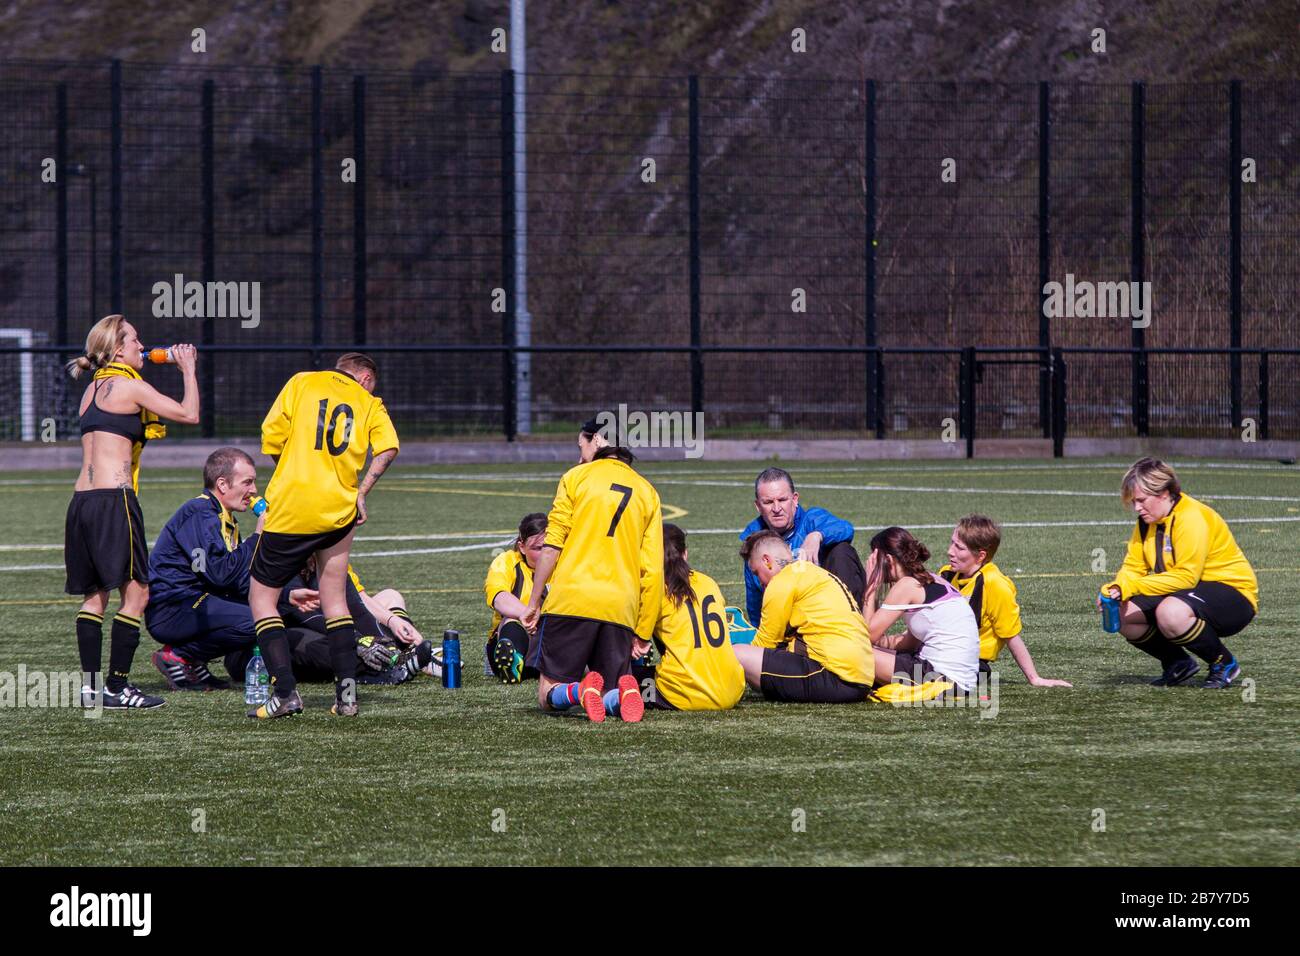 Women's Football at Ebbw Vale, Wales. Stock Photo